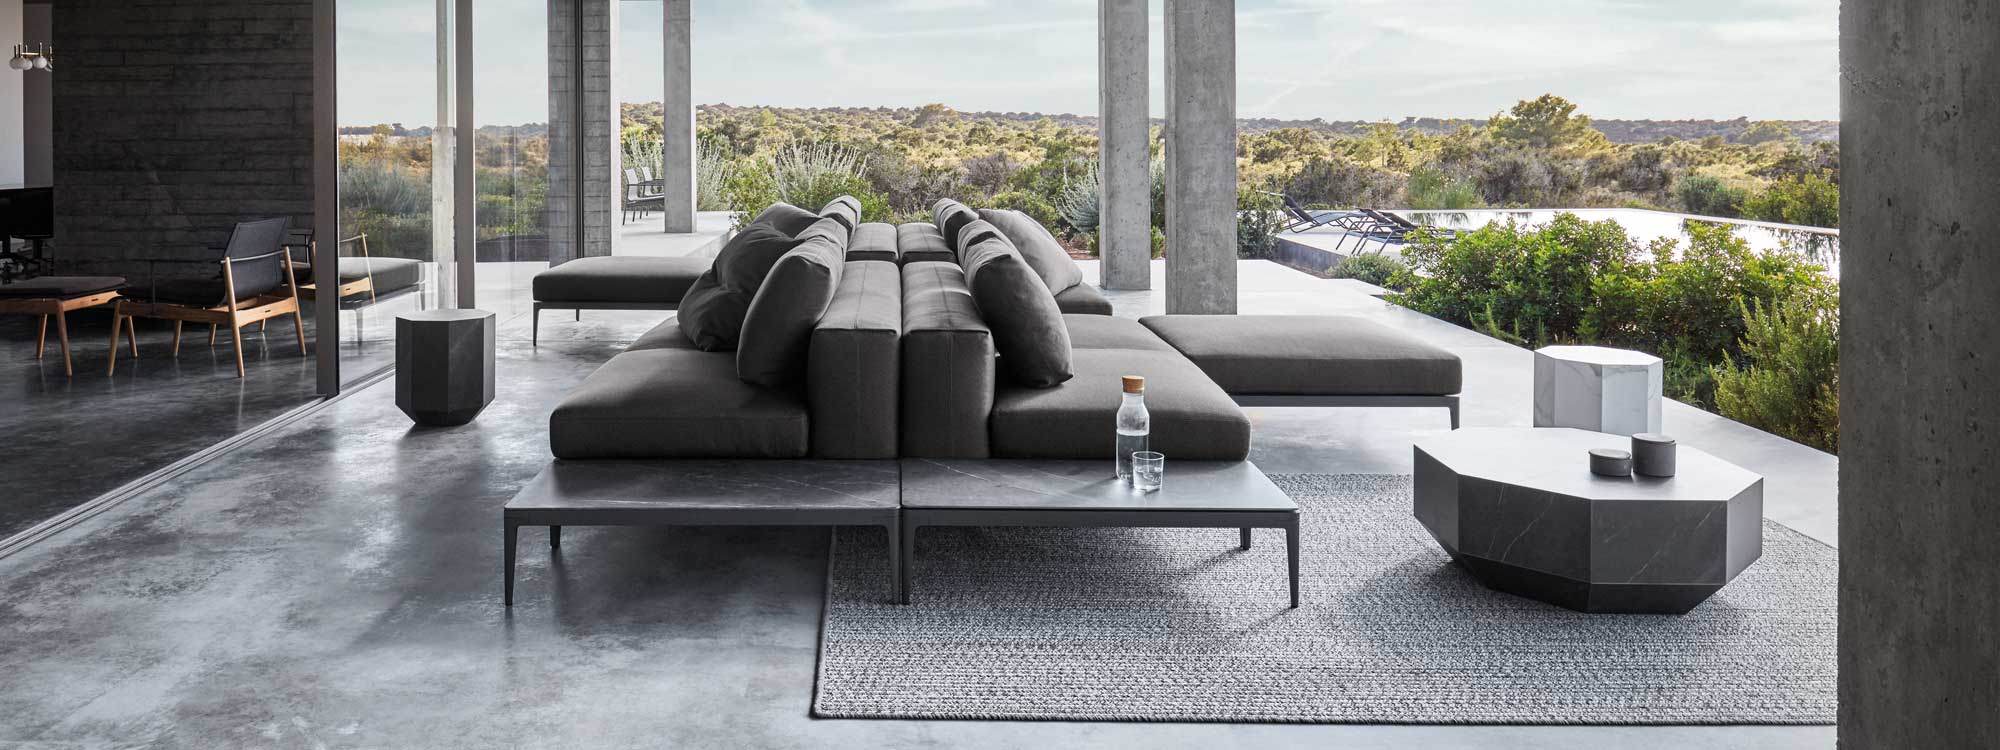 Image of back-to-back Grid luxury garden sofas by Gloster beneath cantilevered ceiling on outdoor terrace